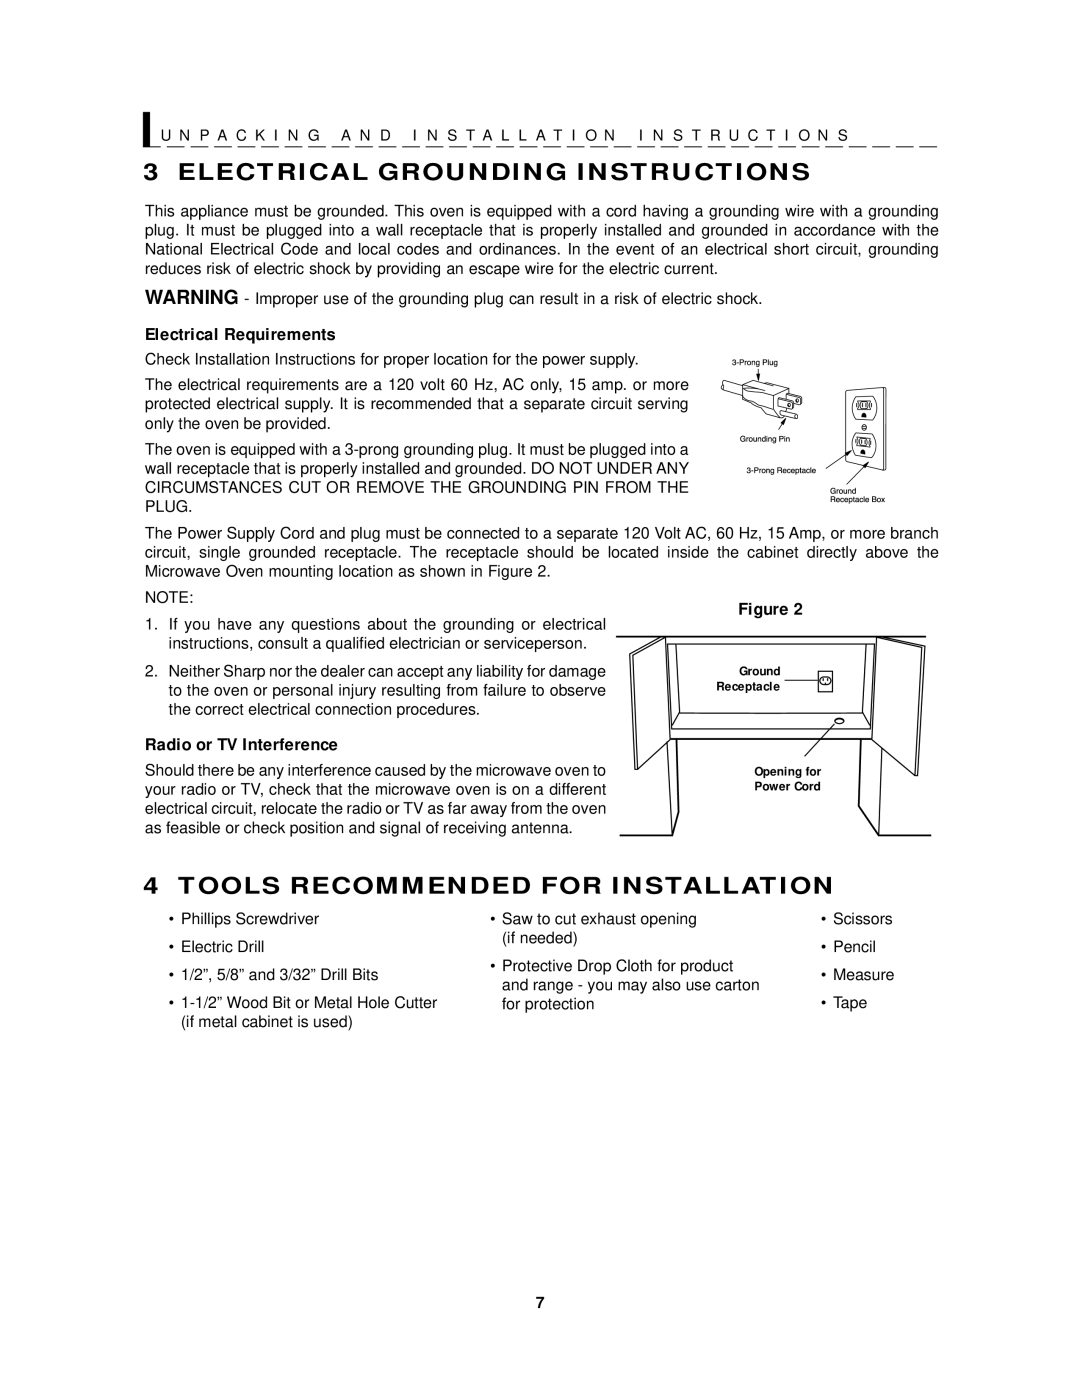 Sharp R-1201, R-1200 operation manual Electrical Grounding Instructions, Tools Recommended for Installation 